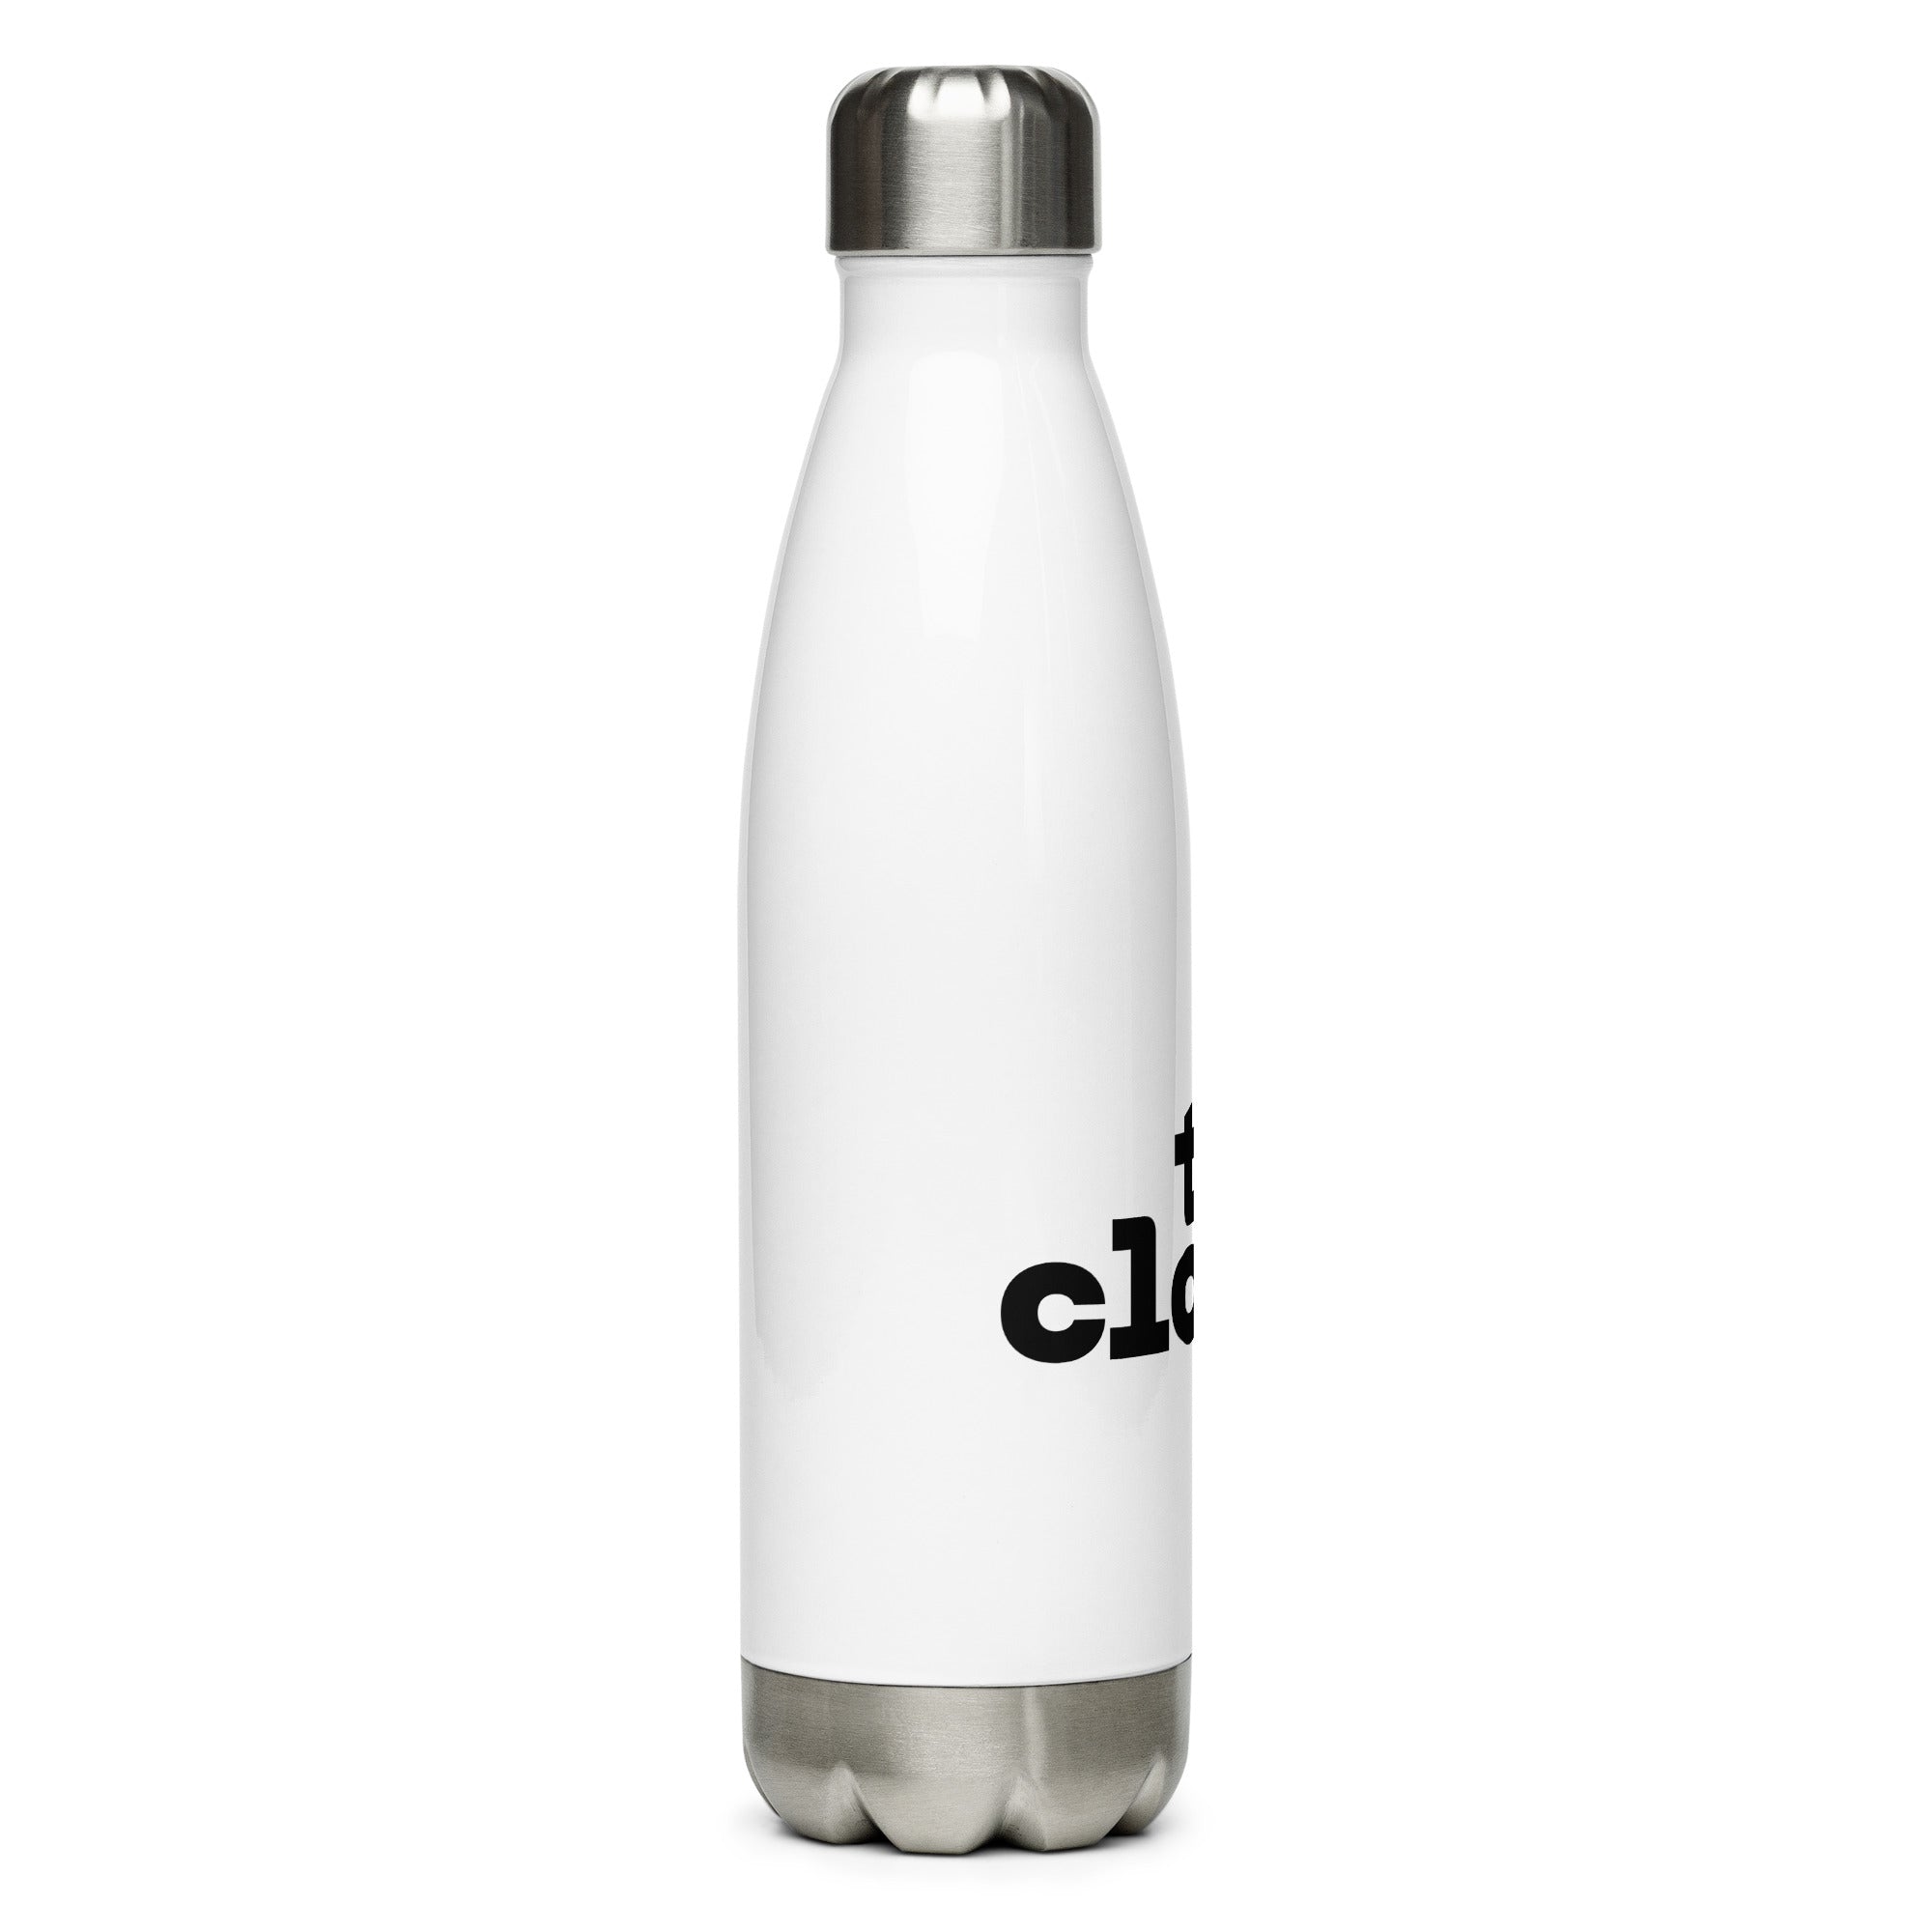 The Closer Stainless Steel Water Bottle